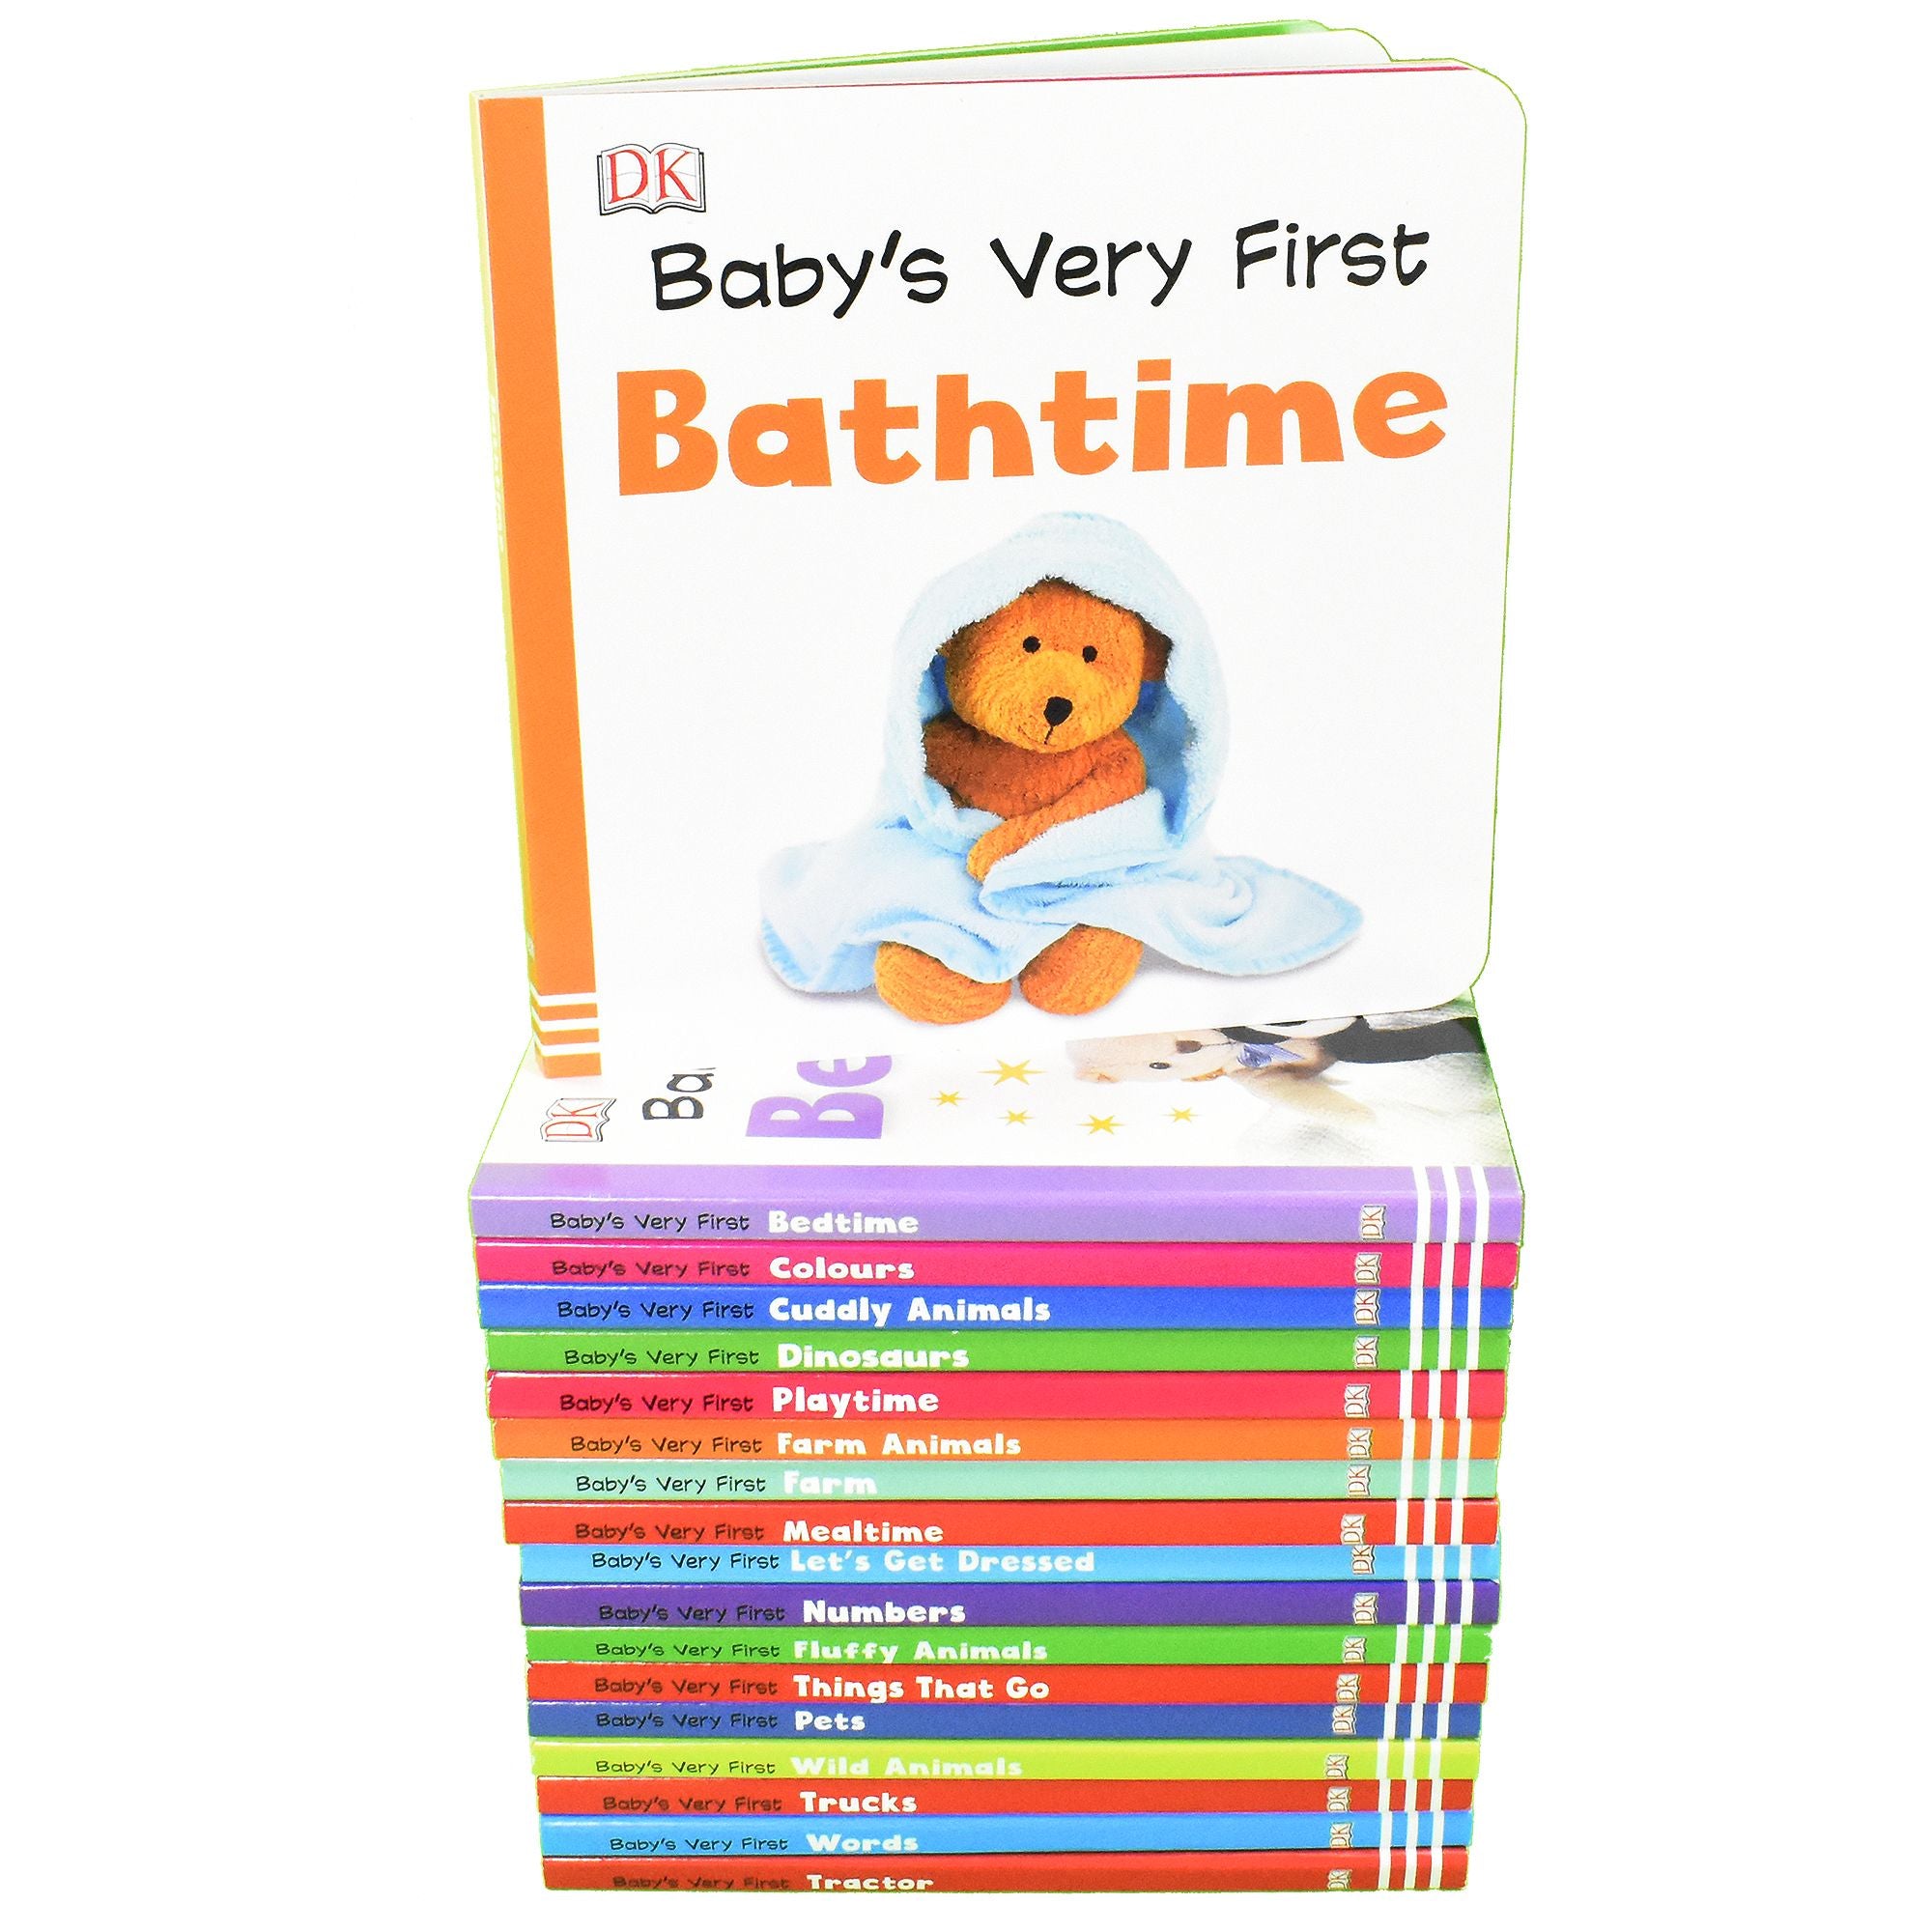 Baby's Very First Library By DK 18 Board Books Set- Ages 0-5 - Board Books